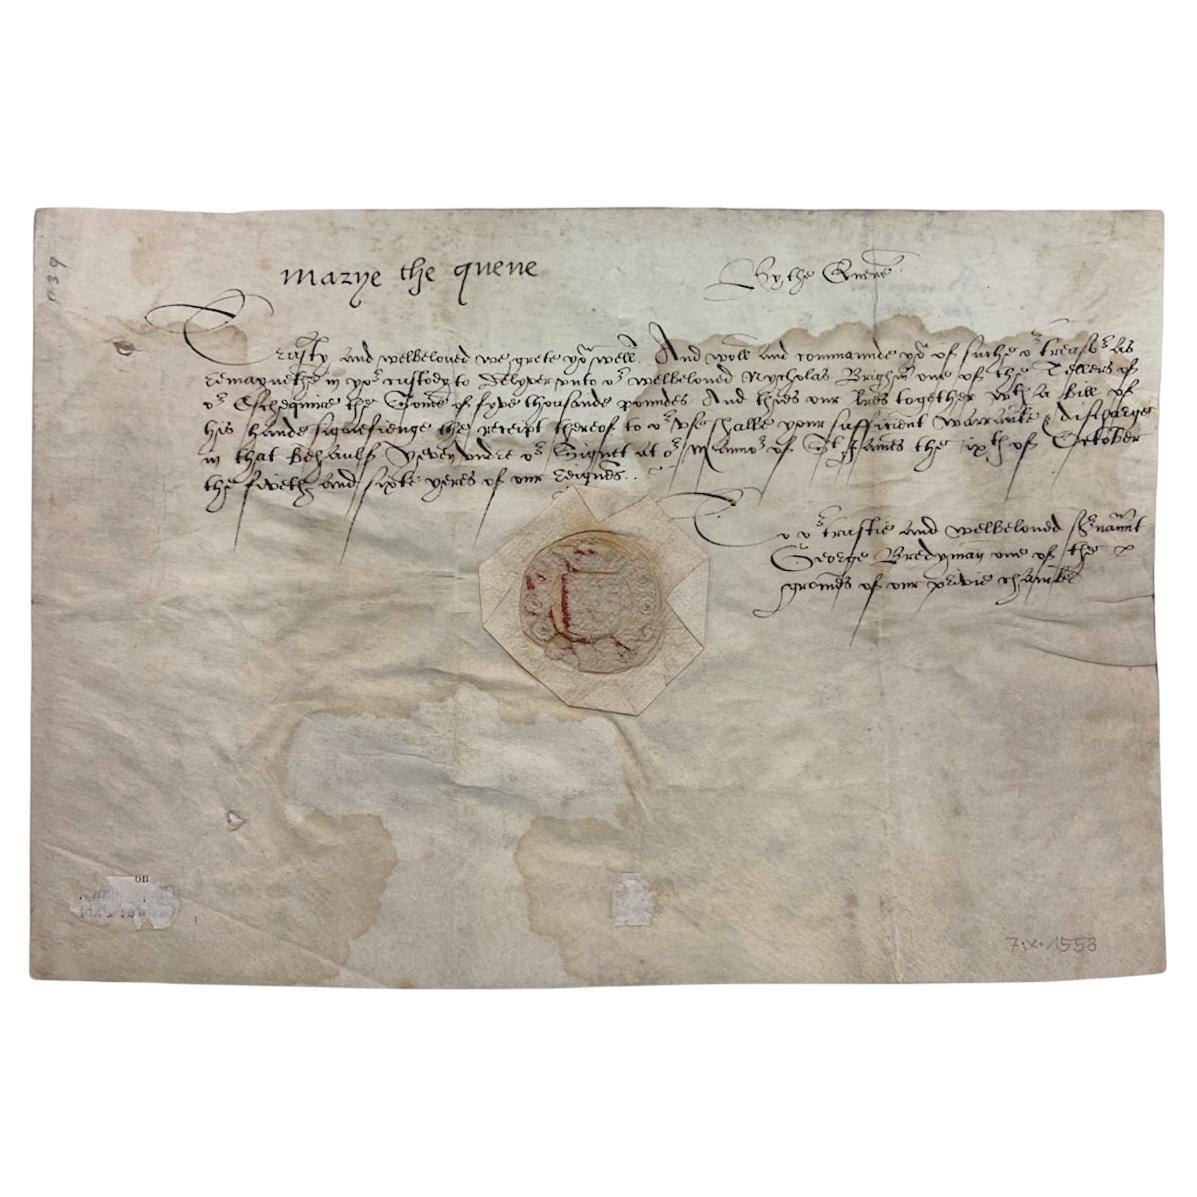 Queen Mary Tudor Signed Royal document with Certificate of Authenticity For Sale